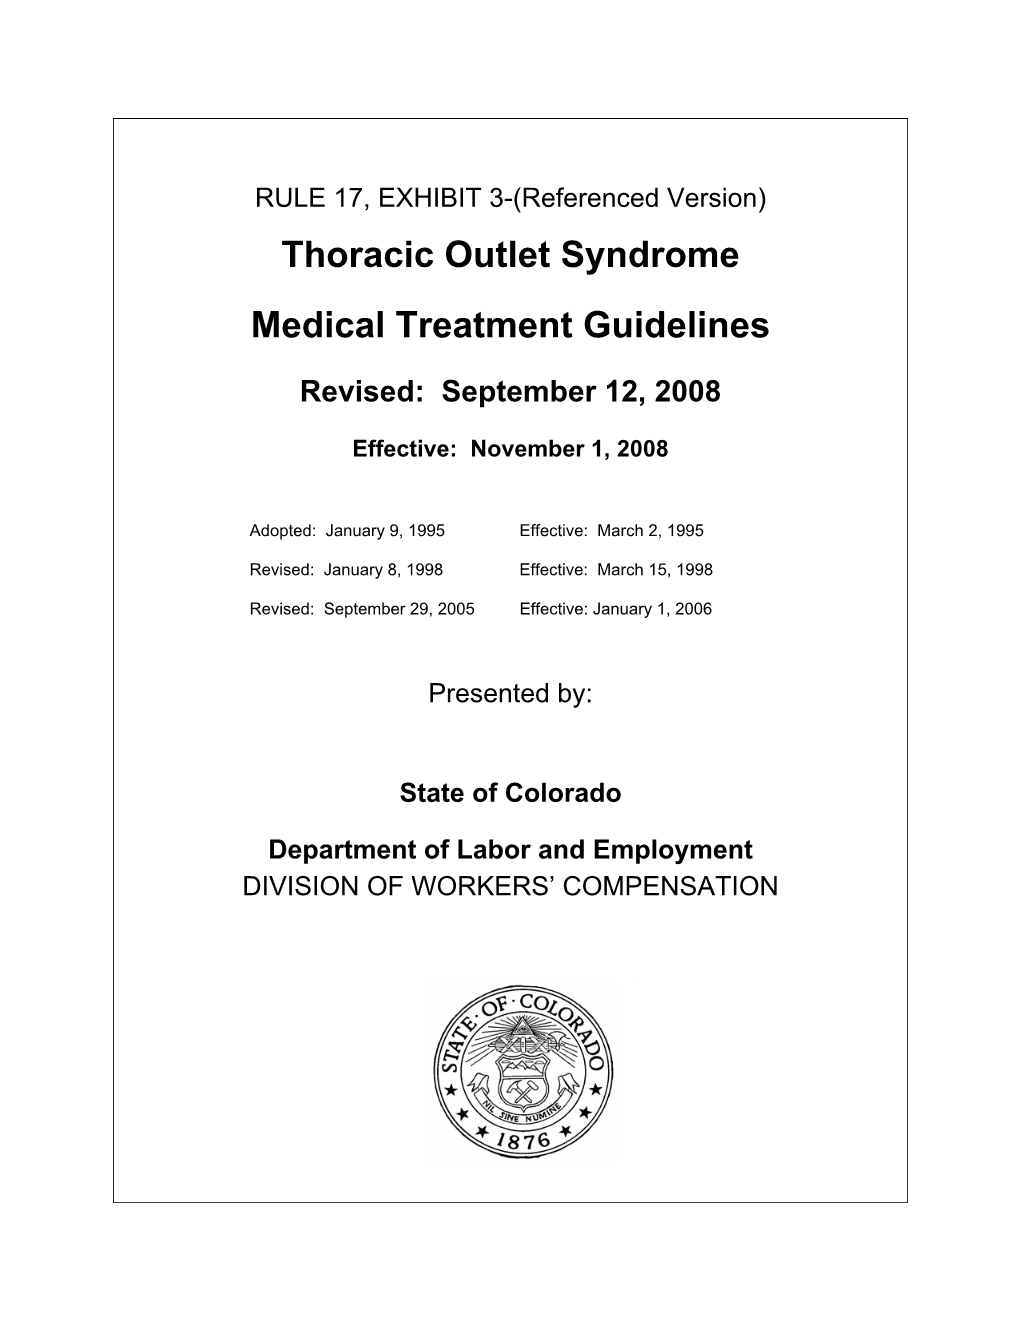 Thoracic Outlet Syndrome Medical Treatment Guidelines